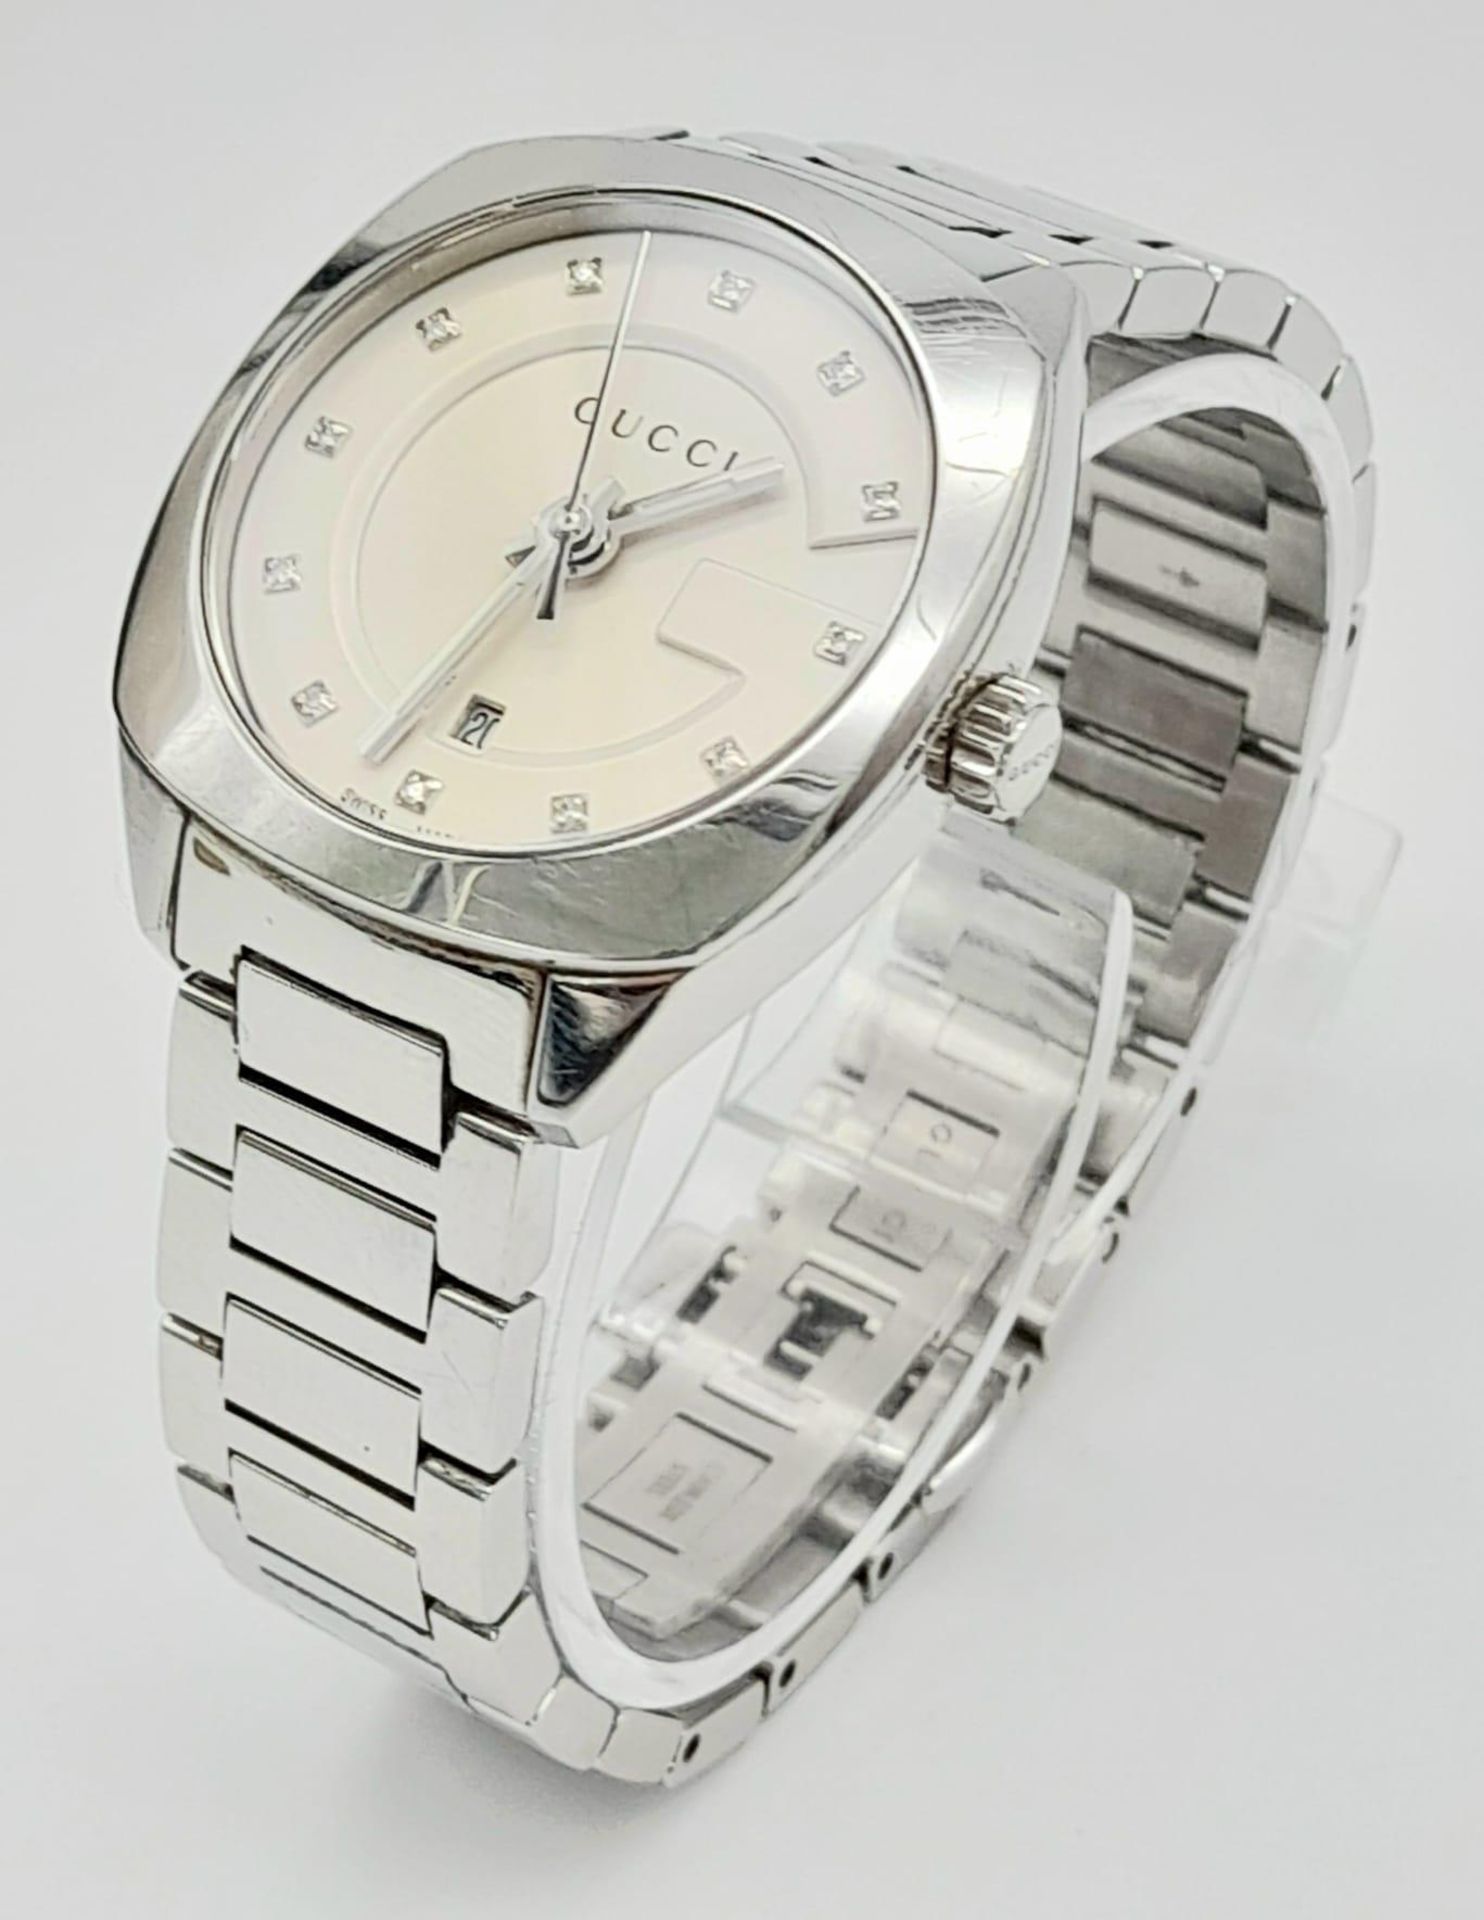 A Gucci Quartz Ladies Watch. Stainless steel strap and case -29mm. Cream dial with date window and